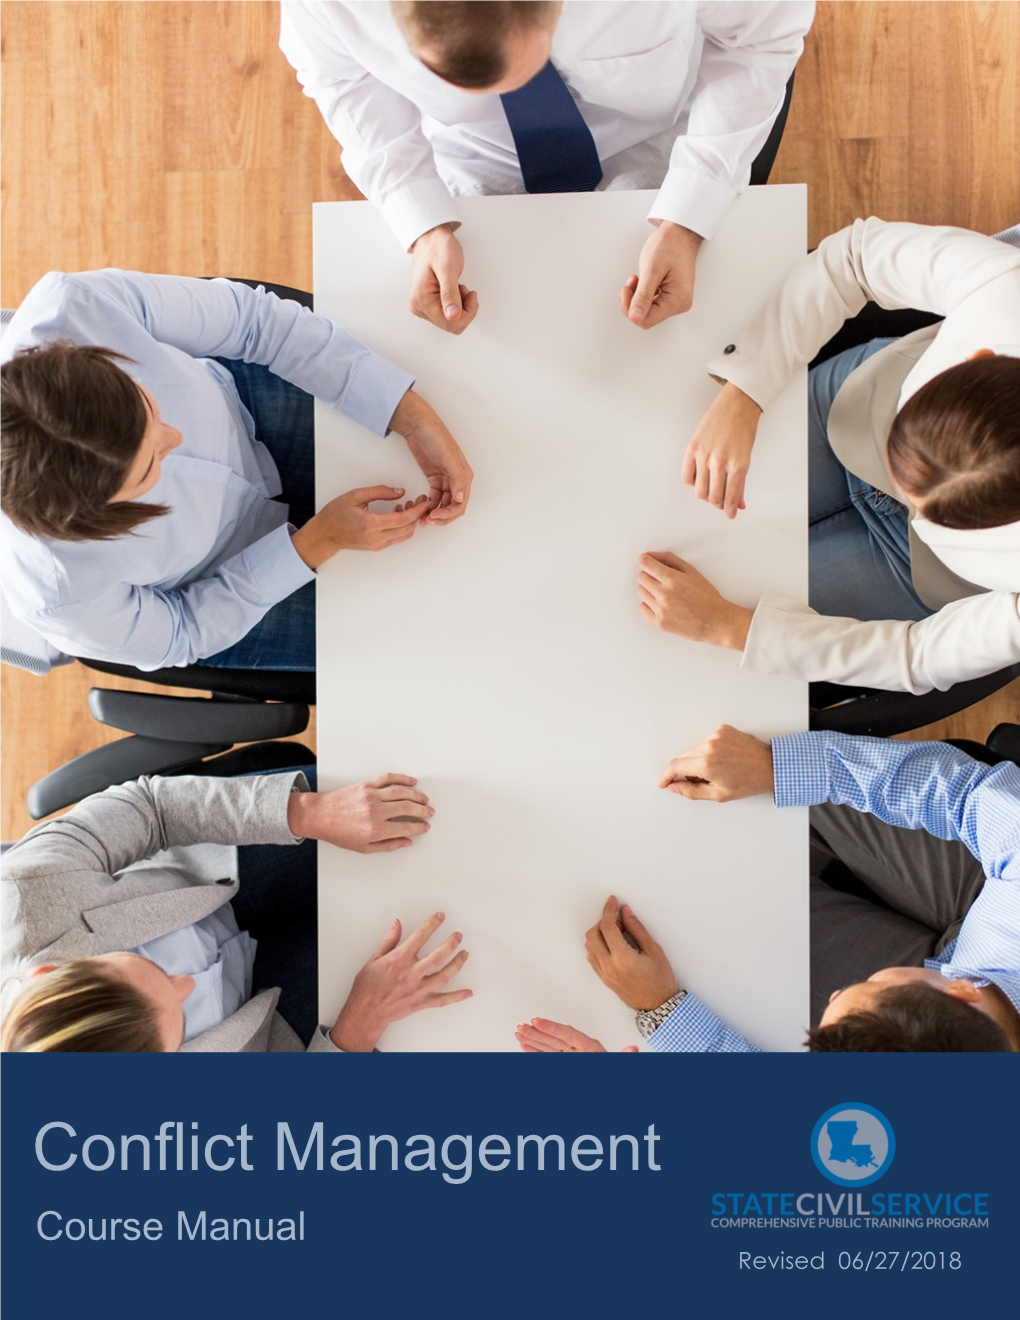 Conflict Management Course Manual Revised 06/27/2018